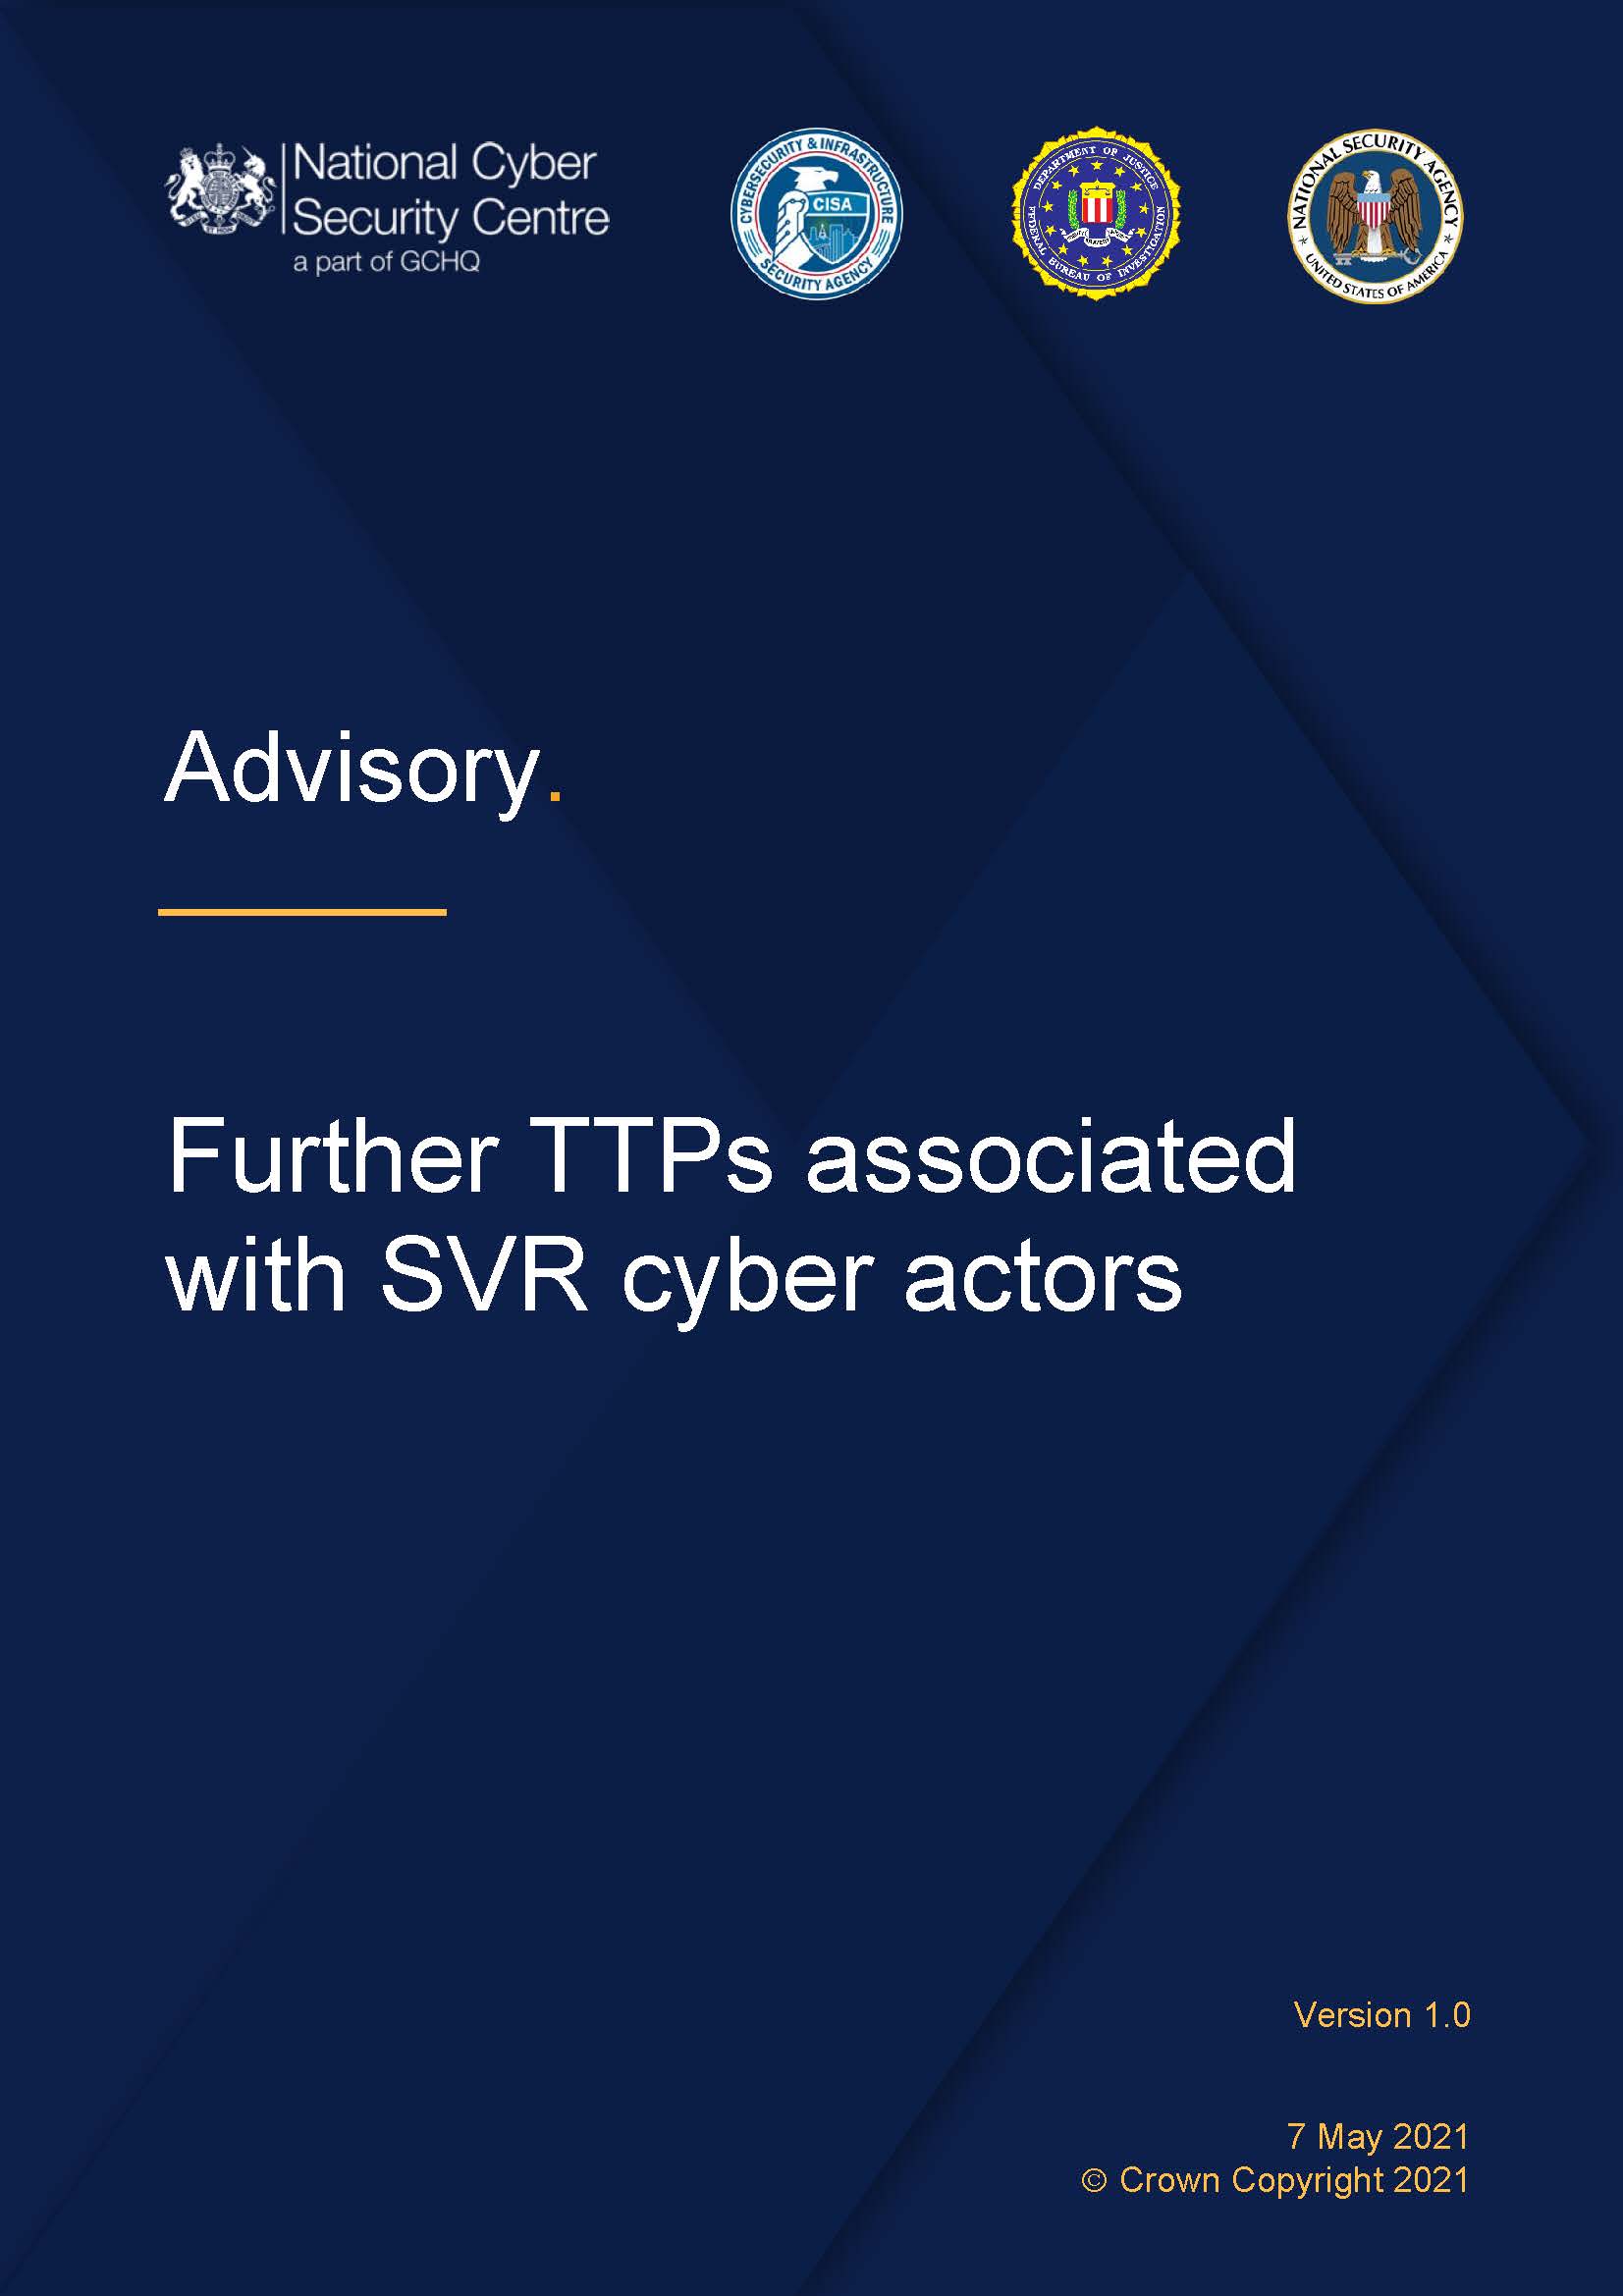 National cyber security center notice of further TTP's associated with SVR cyber actors 